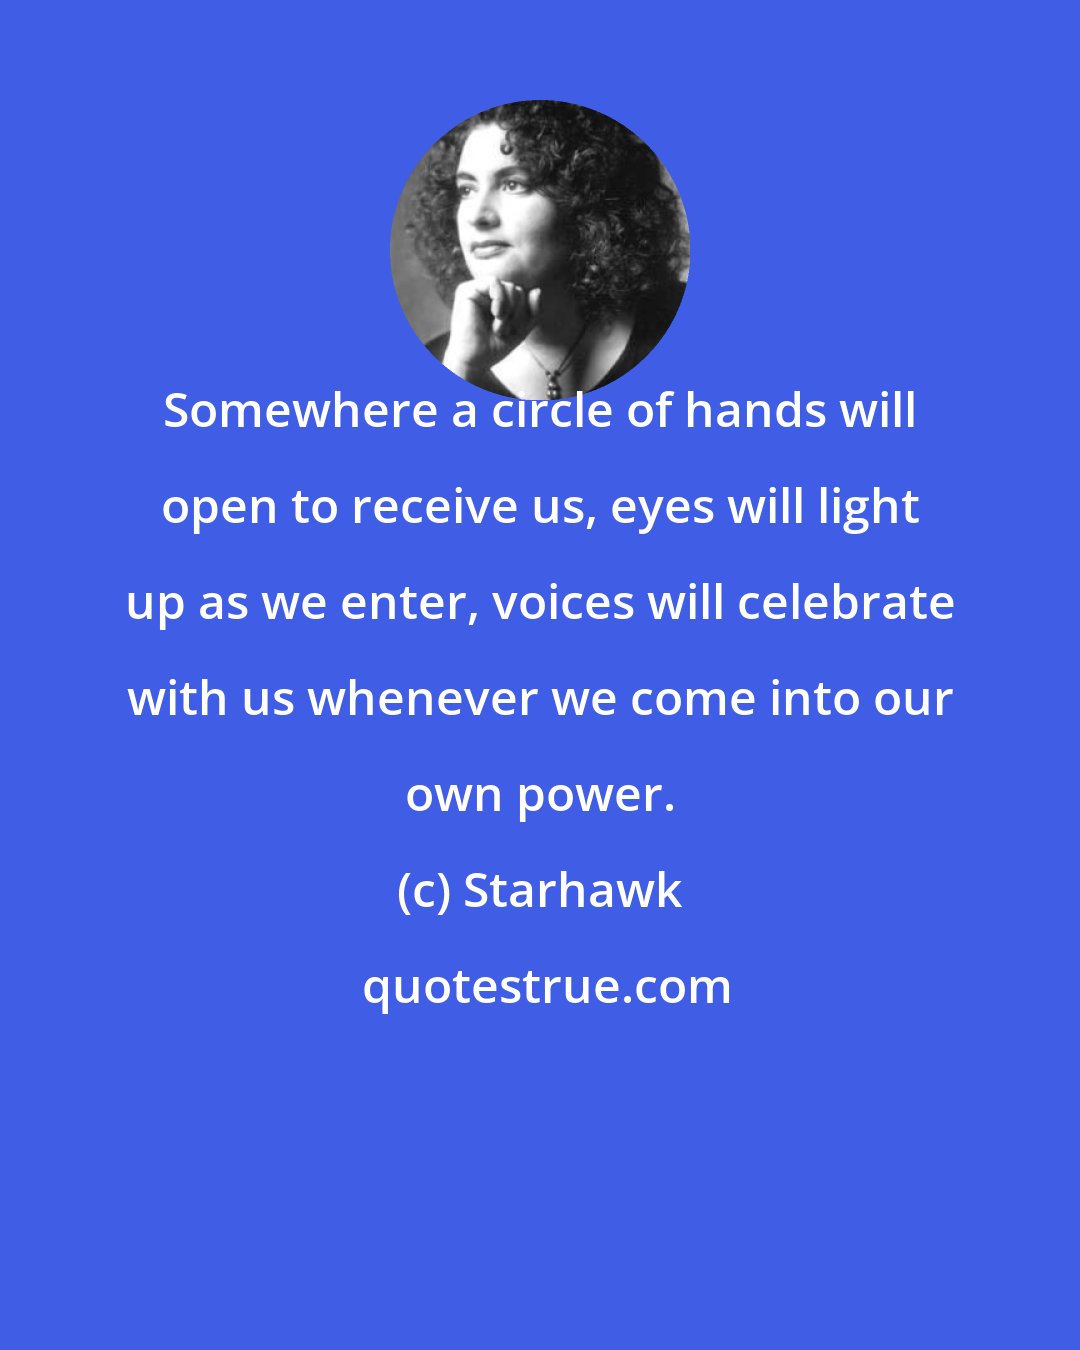 Starhawk: Somewhere a circle of hands will open to receive us, eyes will light up as we enter, voices will celebrate with us whenever we come into our own power.